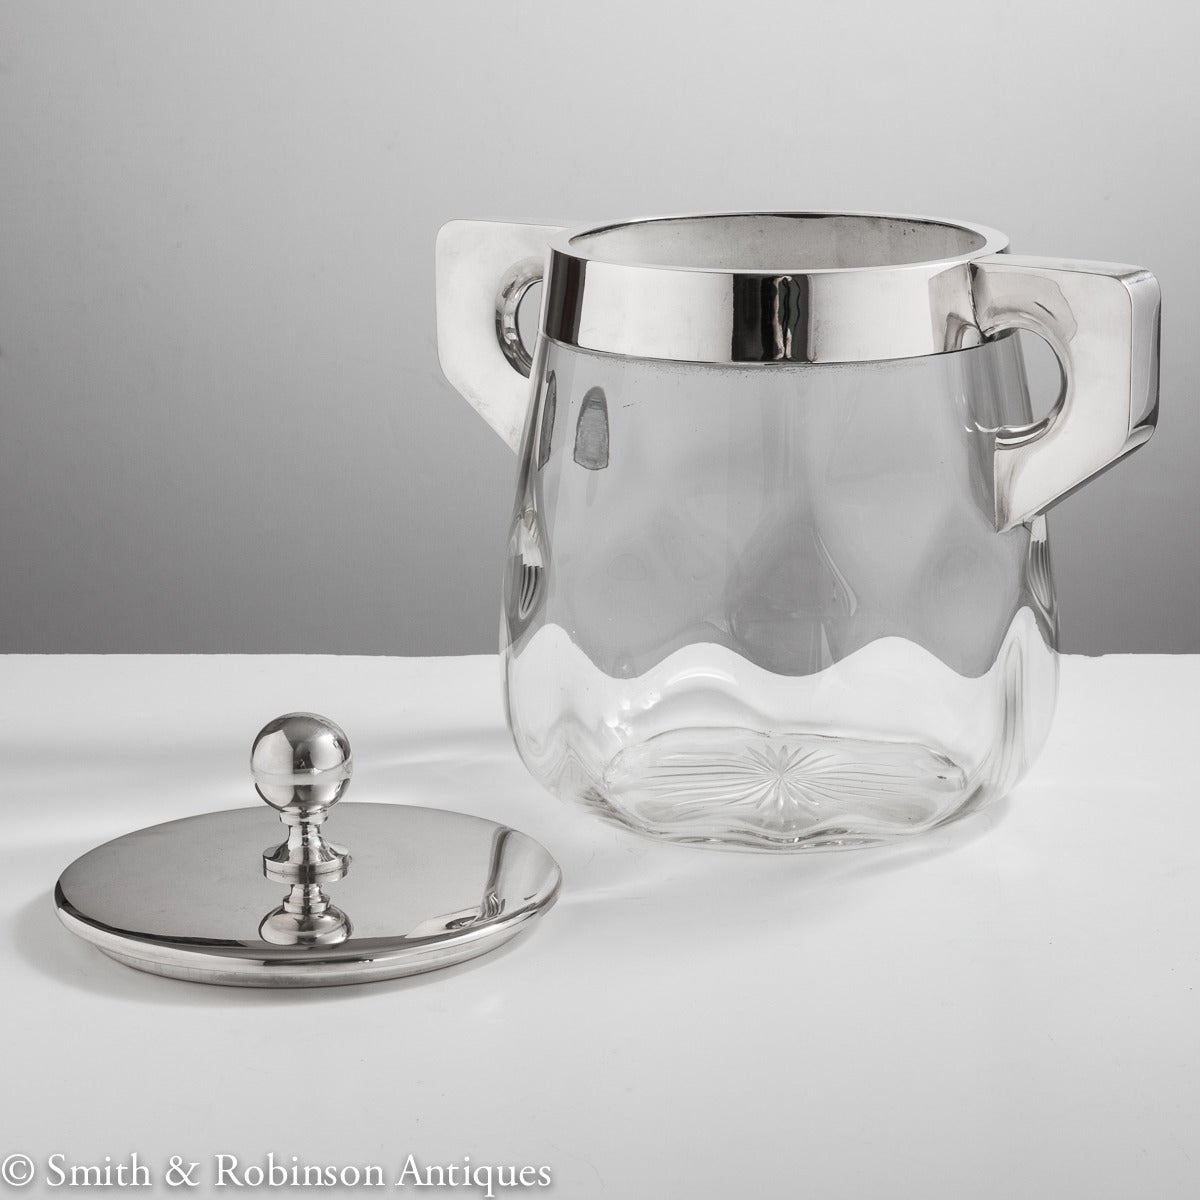 German Large and Impressive Glass and Silver Container by Maker Meyen & Co, Berlin